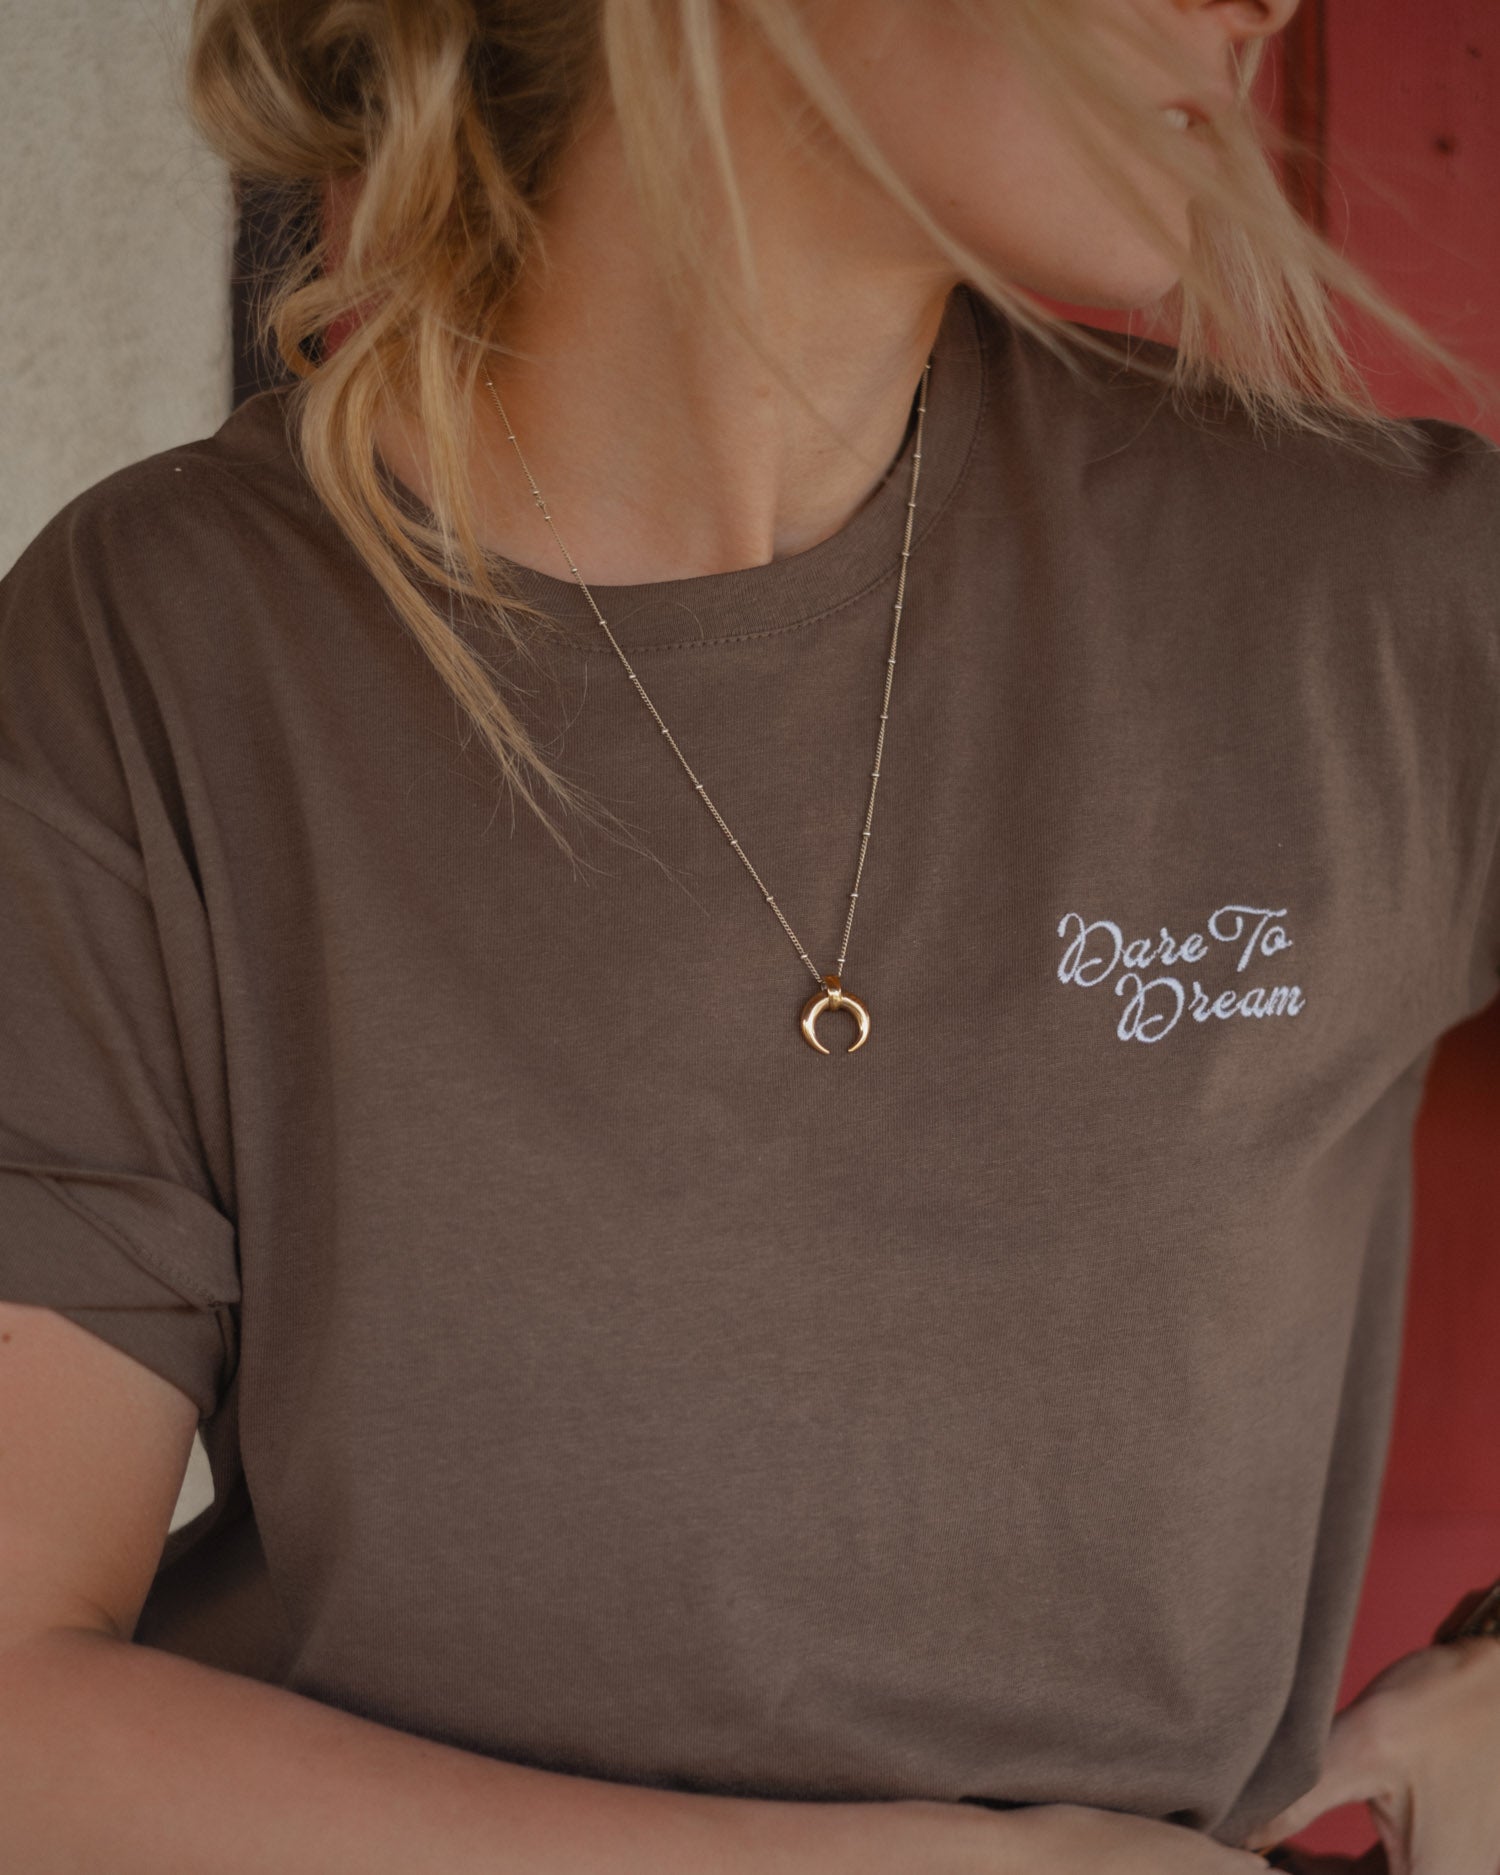 Dare to Dream mocha brown embroidered t-shirt by Art Disco Original Goods